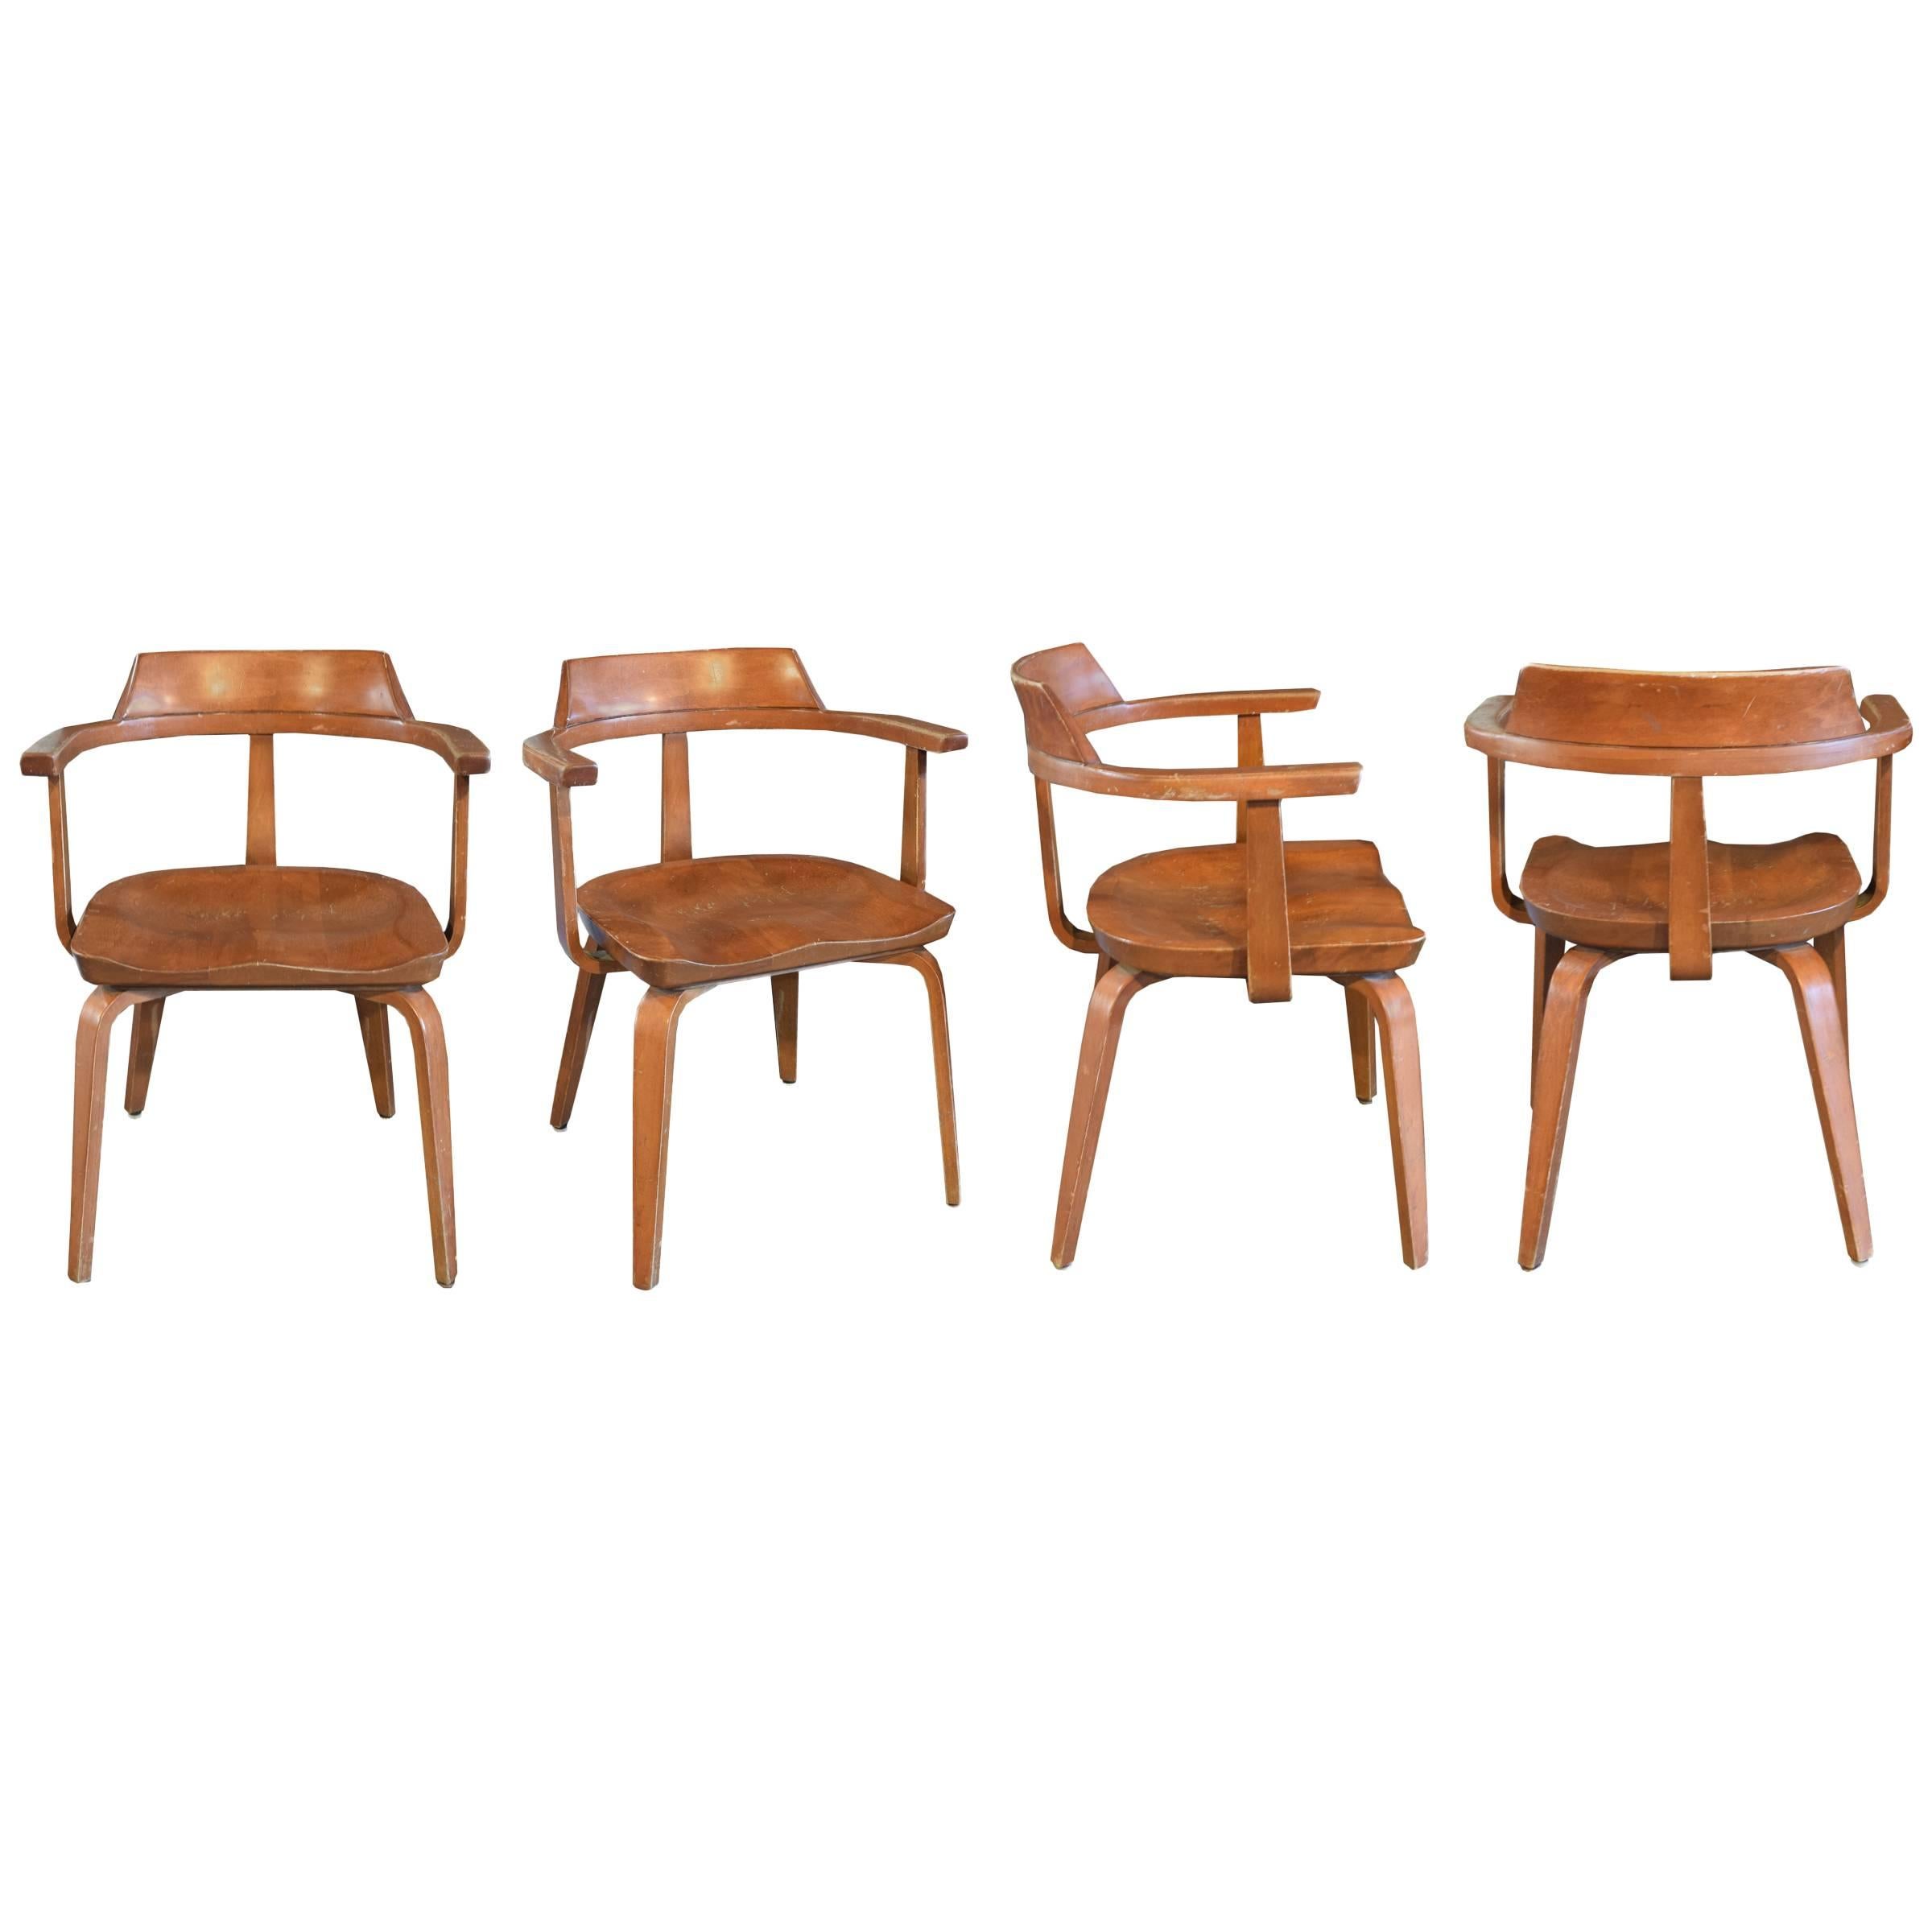 "W199" Armchairs by Walter Gropius